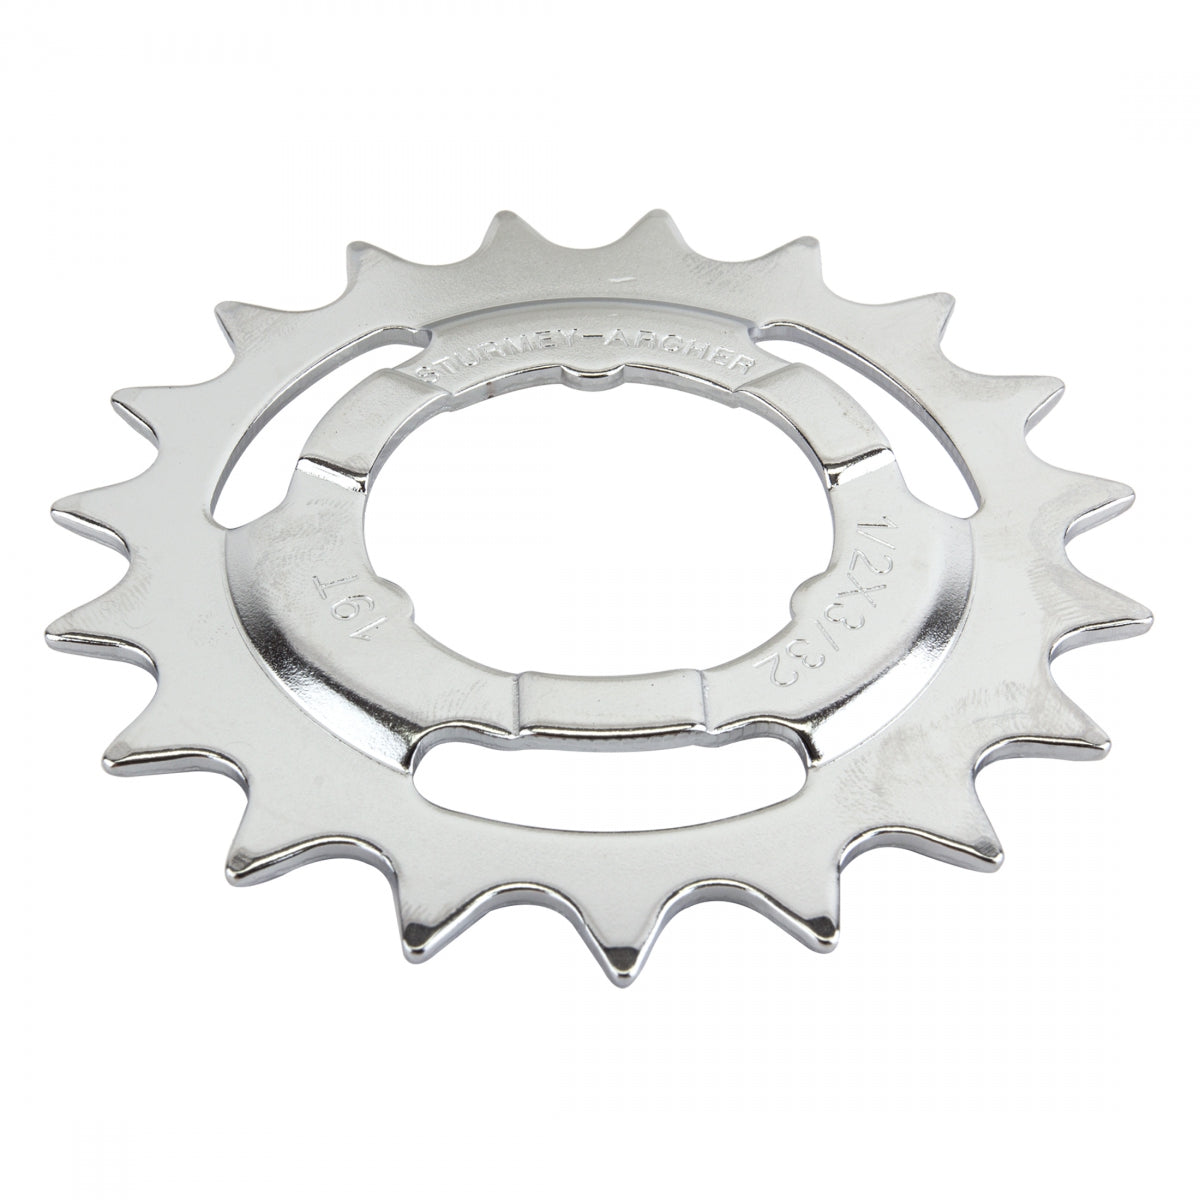 Hub Part S/A Hsl-858 Sprocket Dished 19T 3/32 Chrome Plated